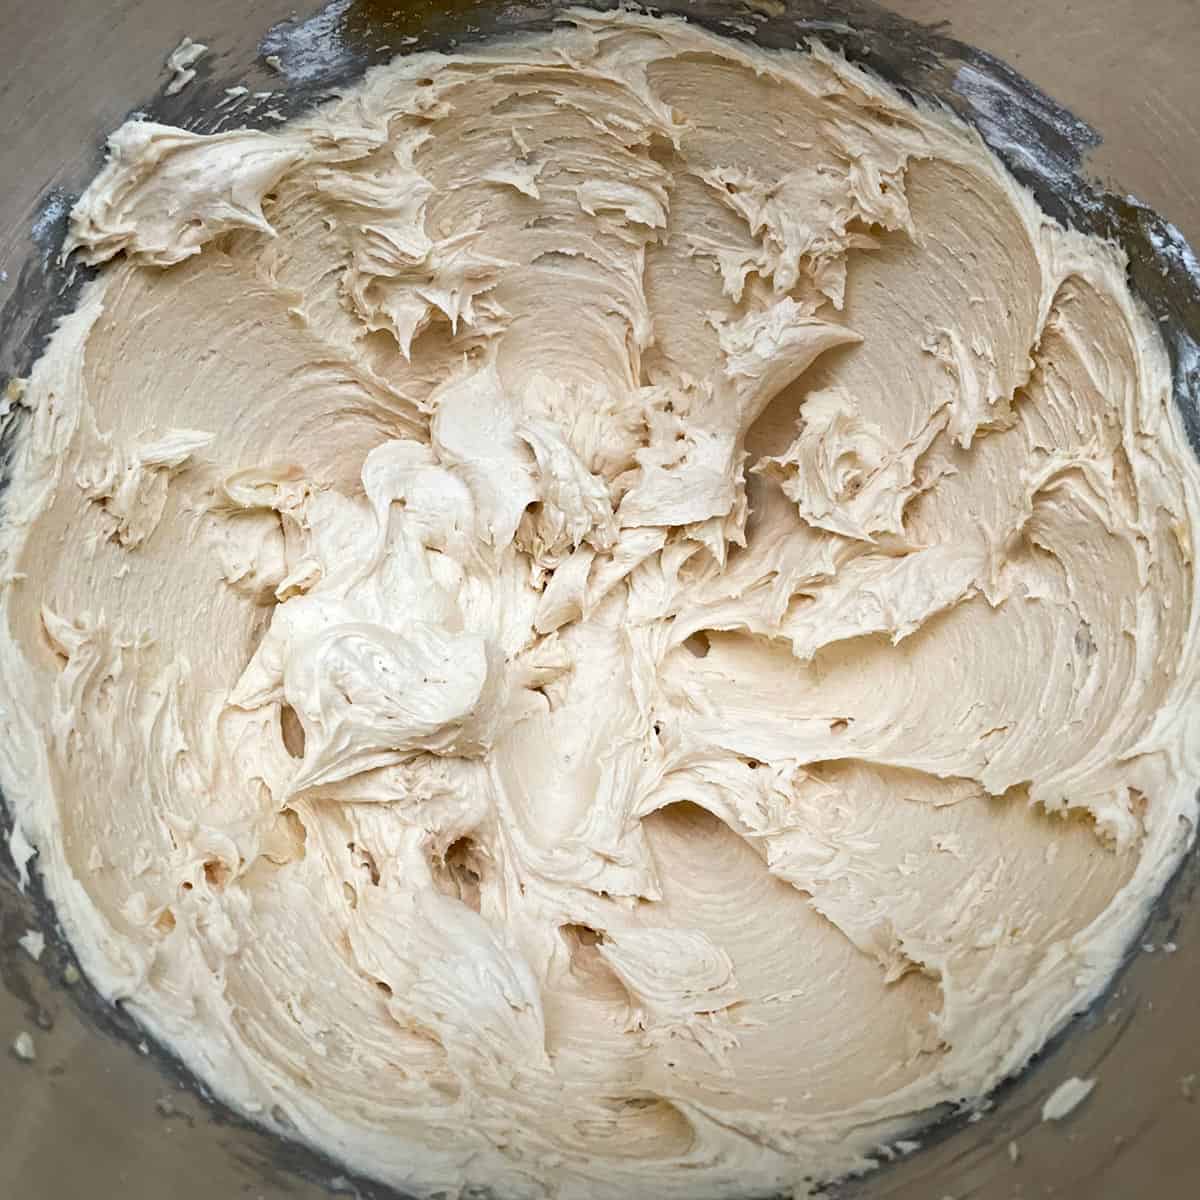 Caramel buttercream icing in a mixer bowl, looking fluffy and yummy.